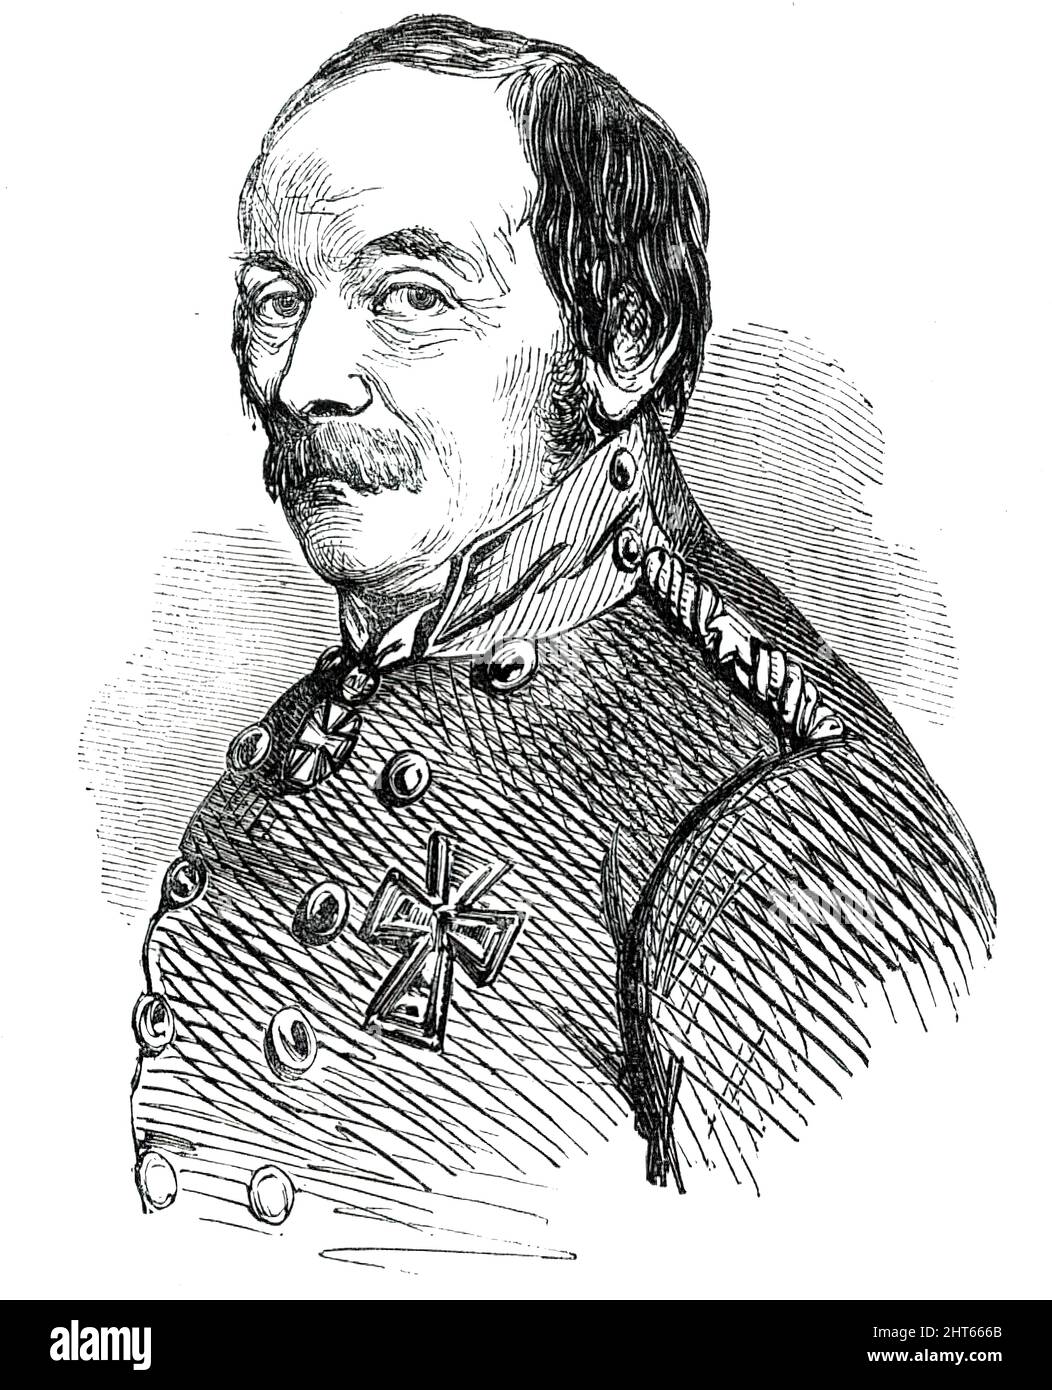 General Schleppegrell, killed in the Battle of Id Tadt [Isted], 1850. Portrait from a drawing by M. Baugniet. 'This gallant soldier, who fell in the late battle of Idstadt, on the 25th ult., was the favourite of the Danish army, and contributed chiefly to the total defeat of the Schleswig-Holsteiners in the storming their entrenchments at Fredericia. He was a truly brave man, and met with the death of a hero whilst leading on his gallant soldiers to victory'. From &quot;Illustrated London News&quot;, 1850. Stock Photo